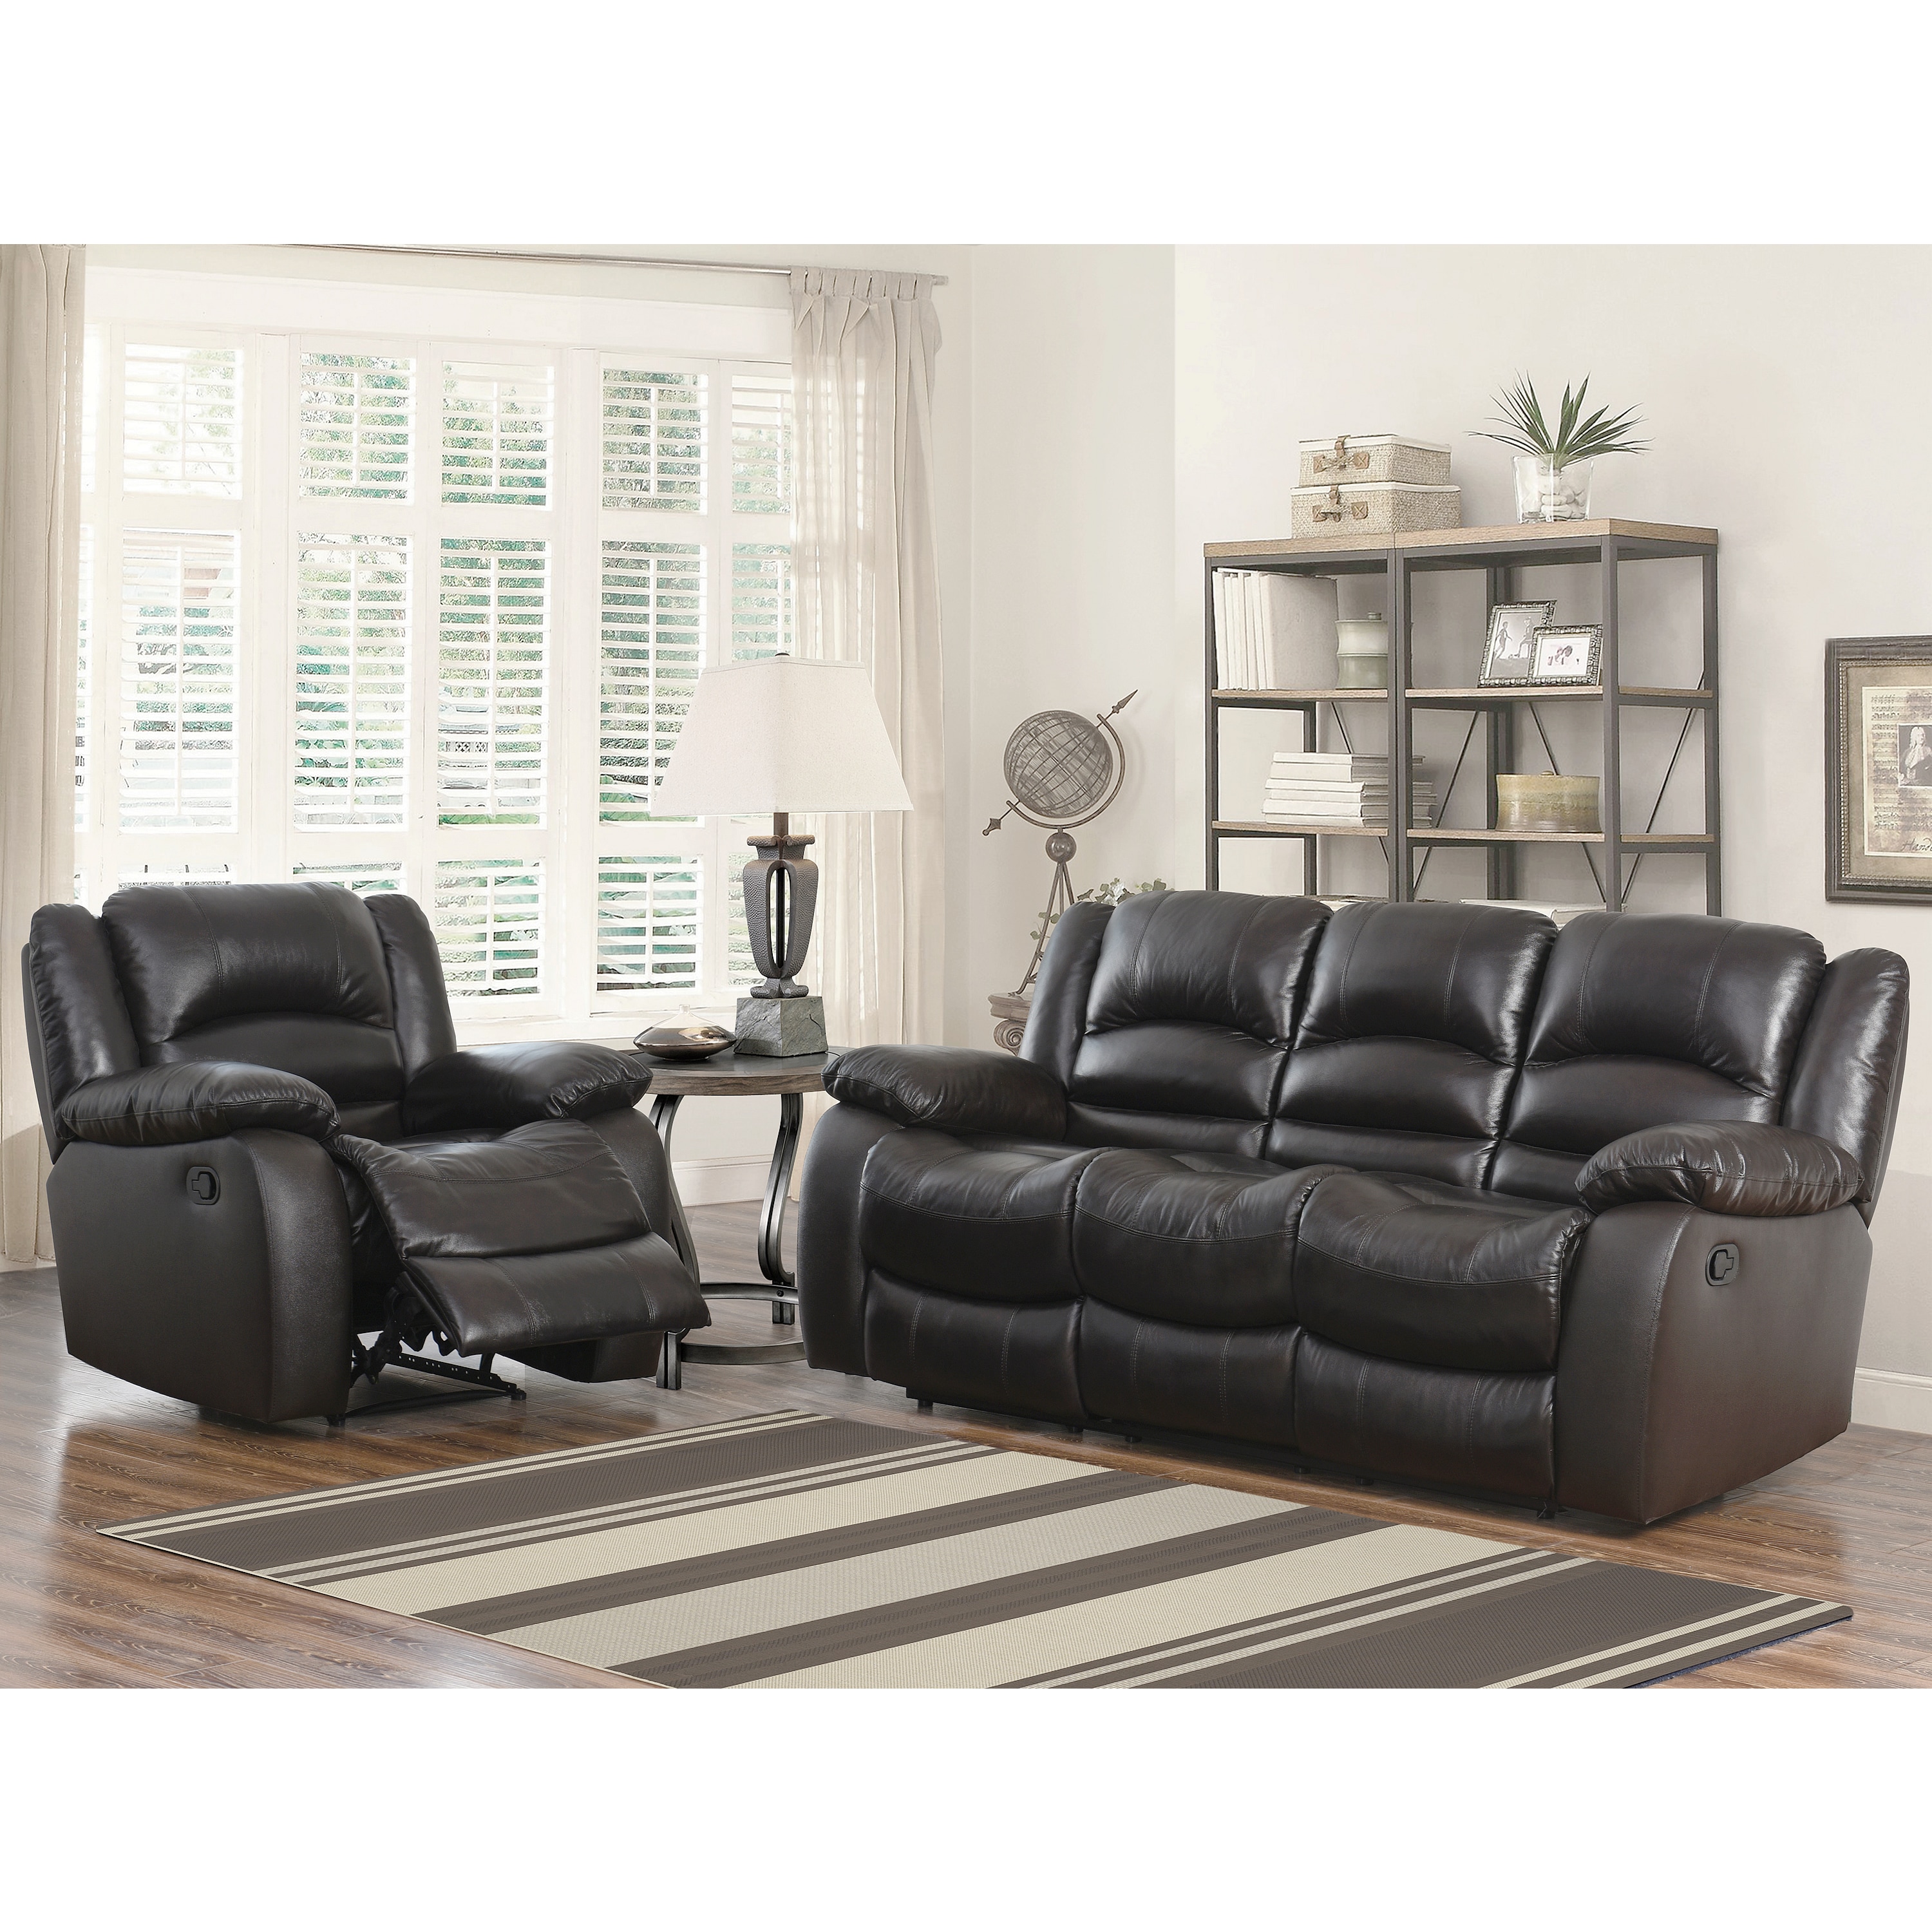 Shop Abbyson Brownstone Top Grain Leather Reclining 2 Piece Living Room